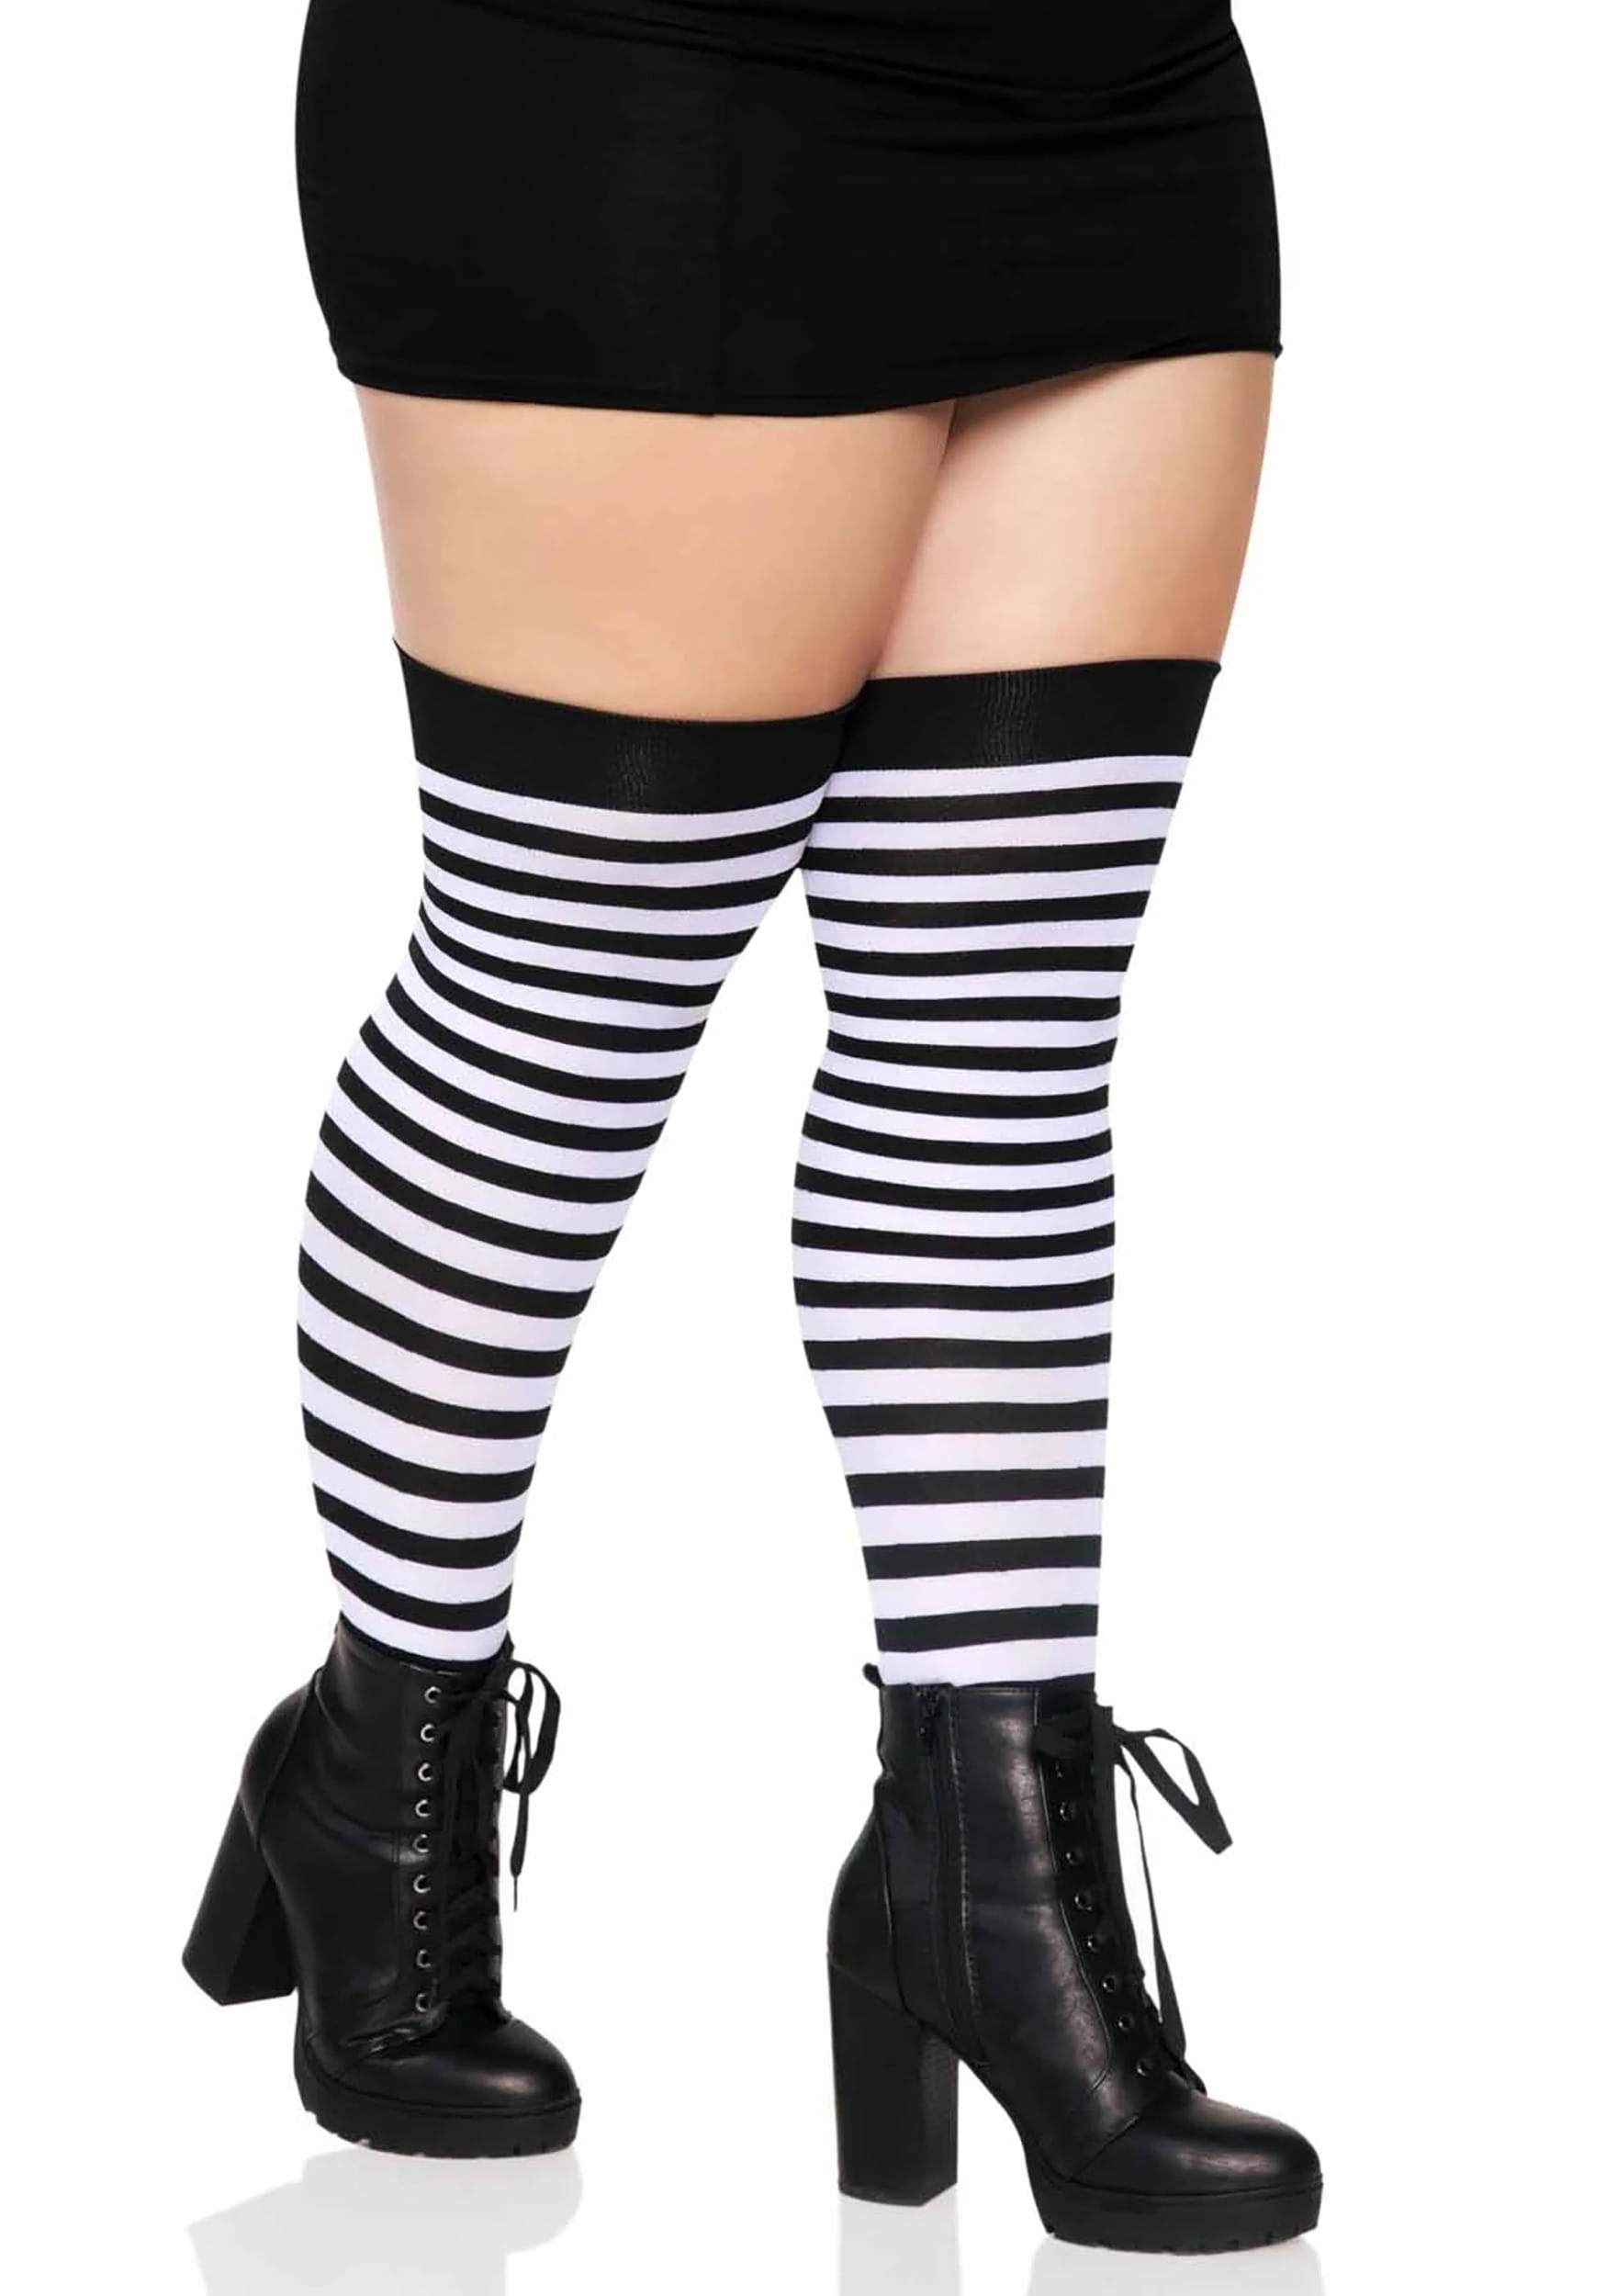 Plus Size Black And White Striped Women's Thigh High Stockings